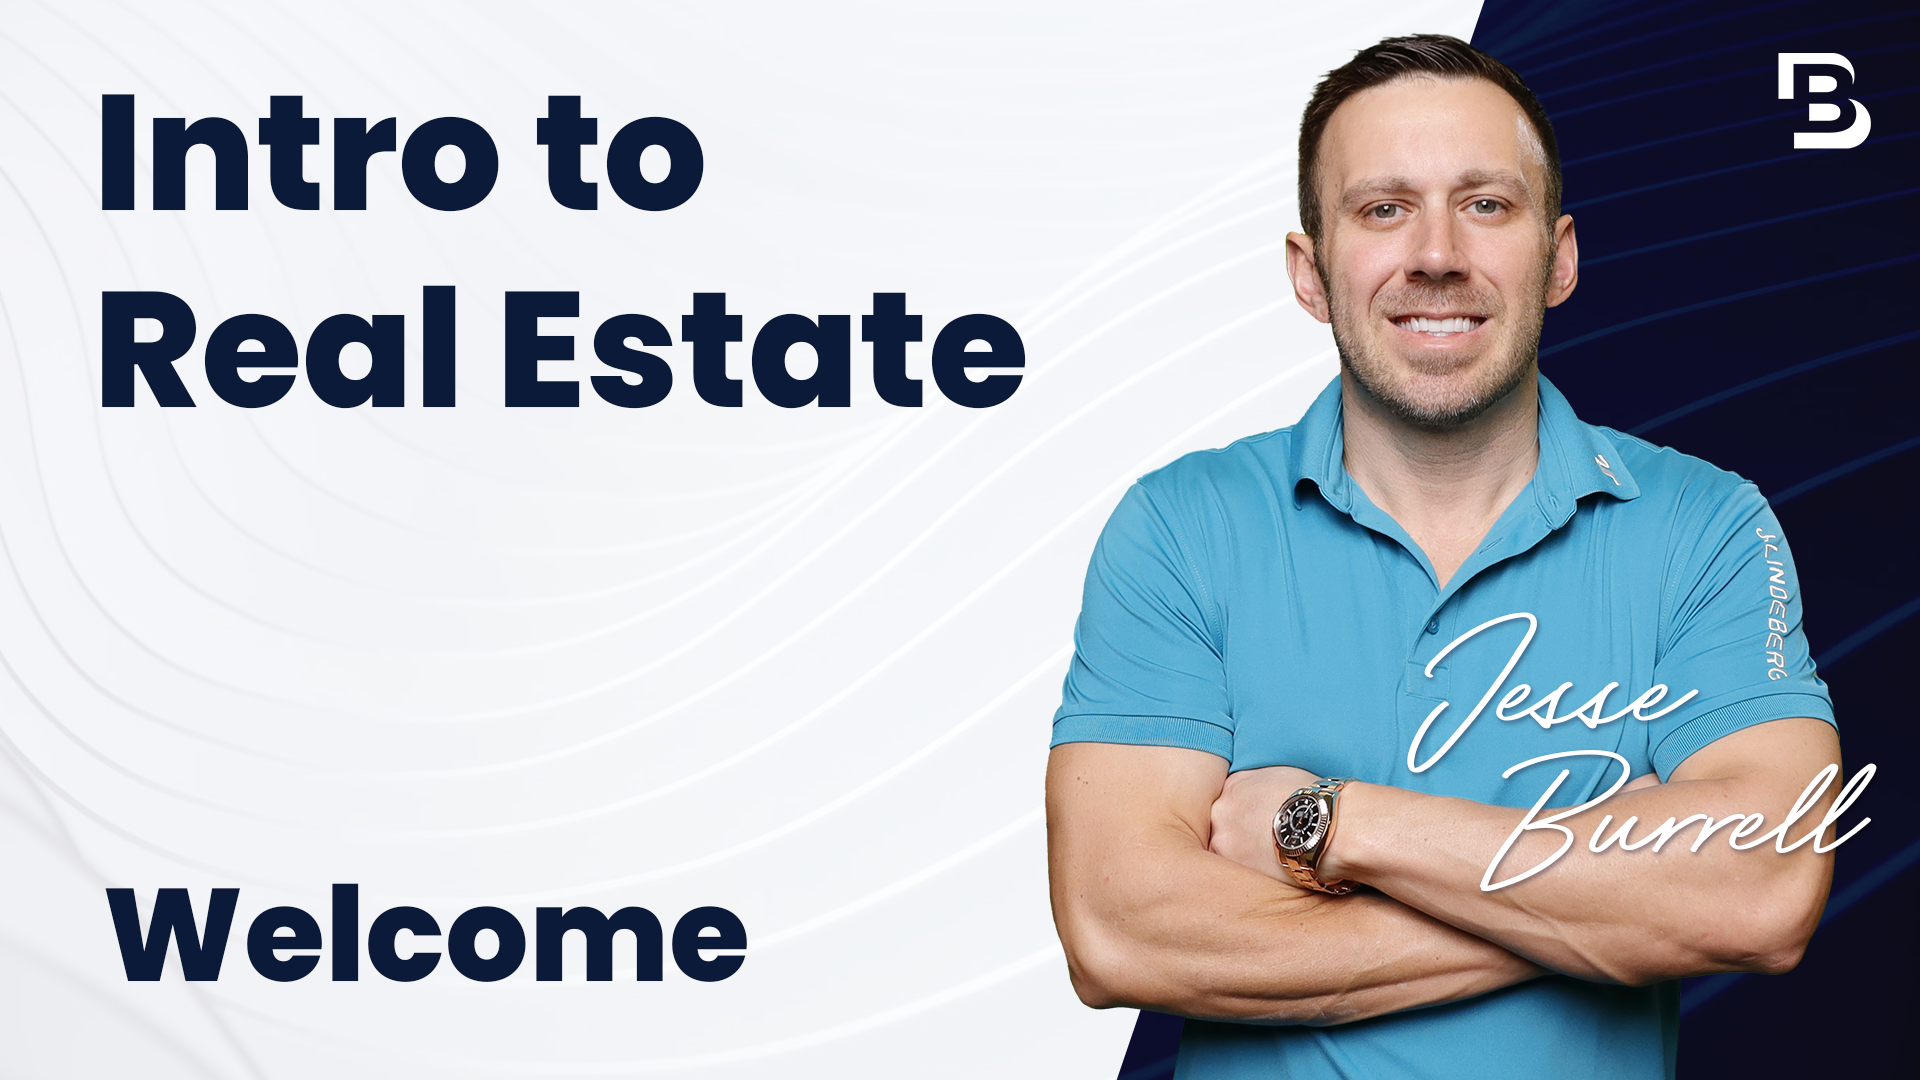 Intro to Real Estate